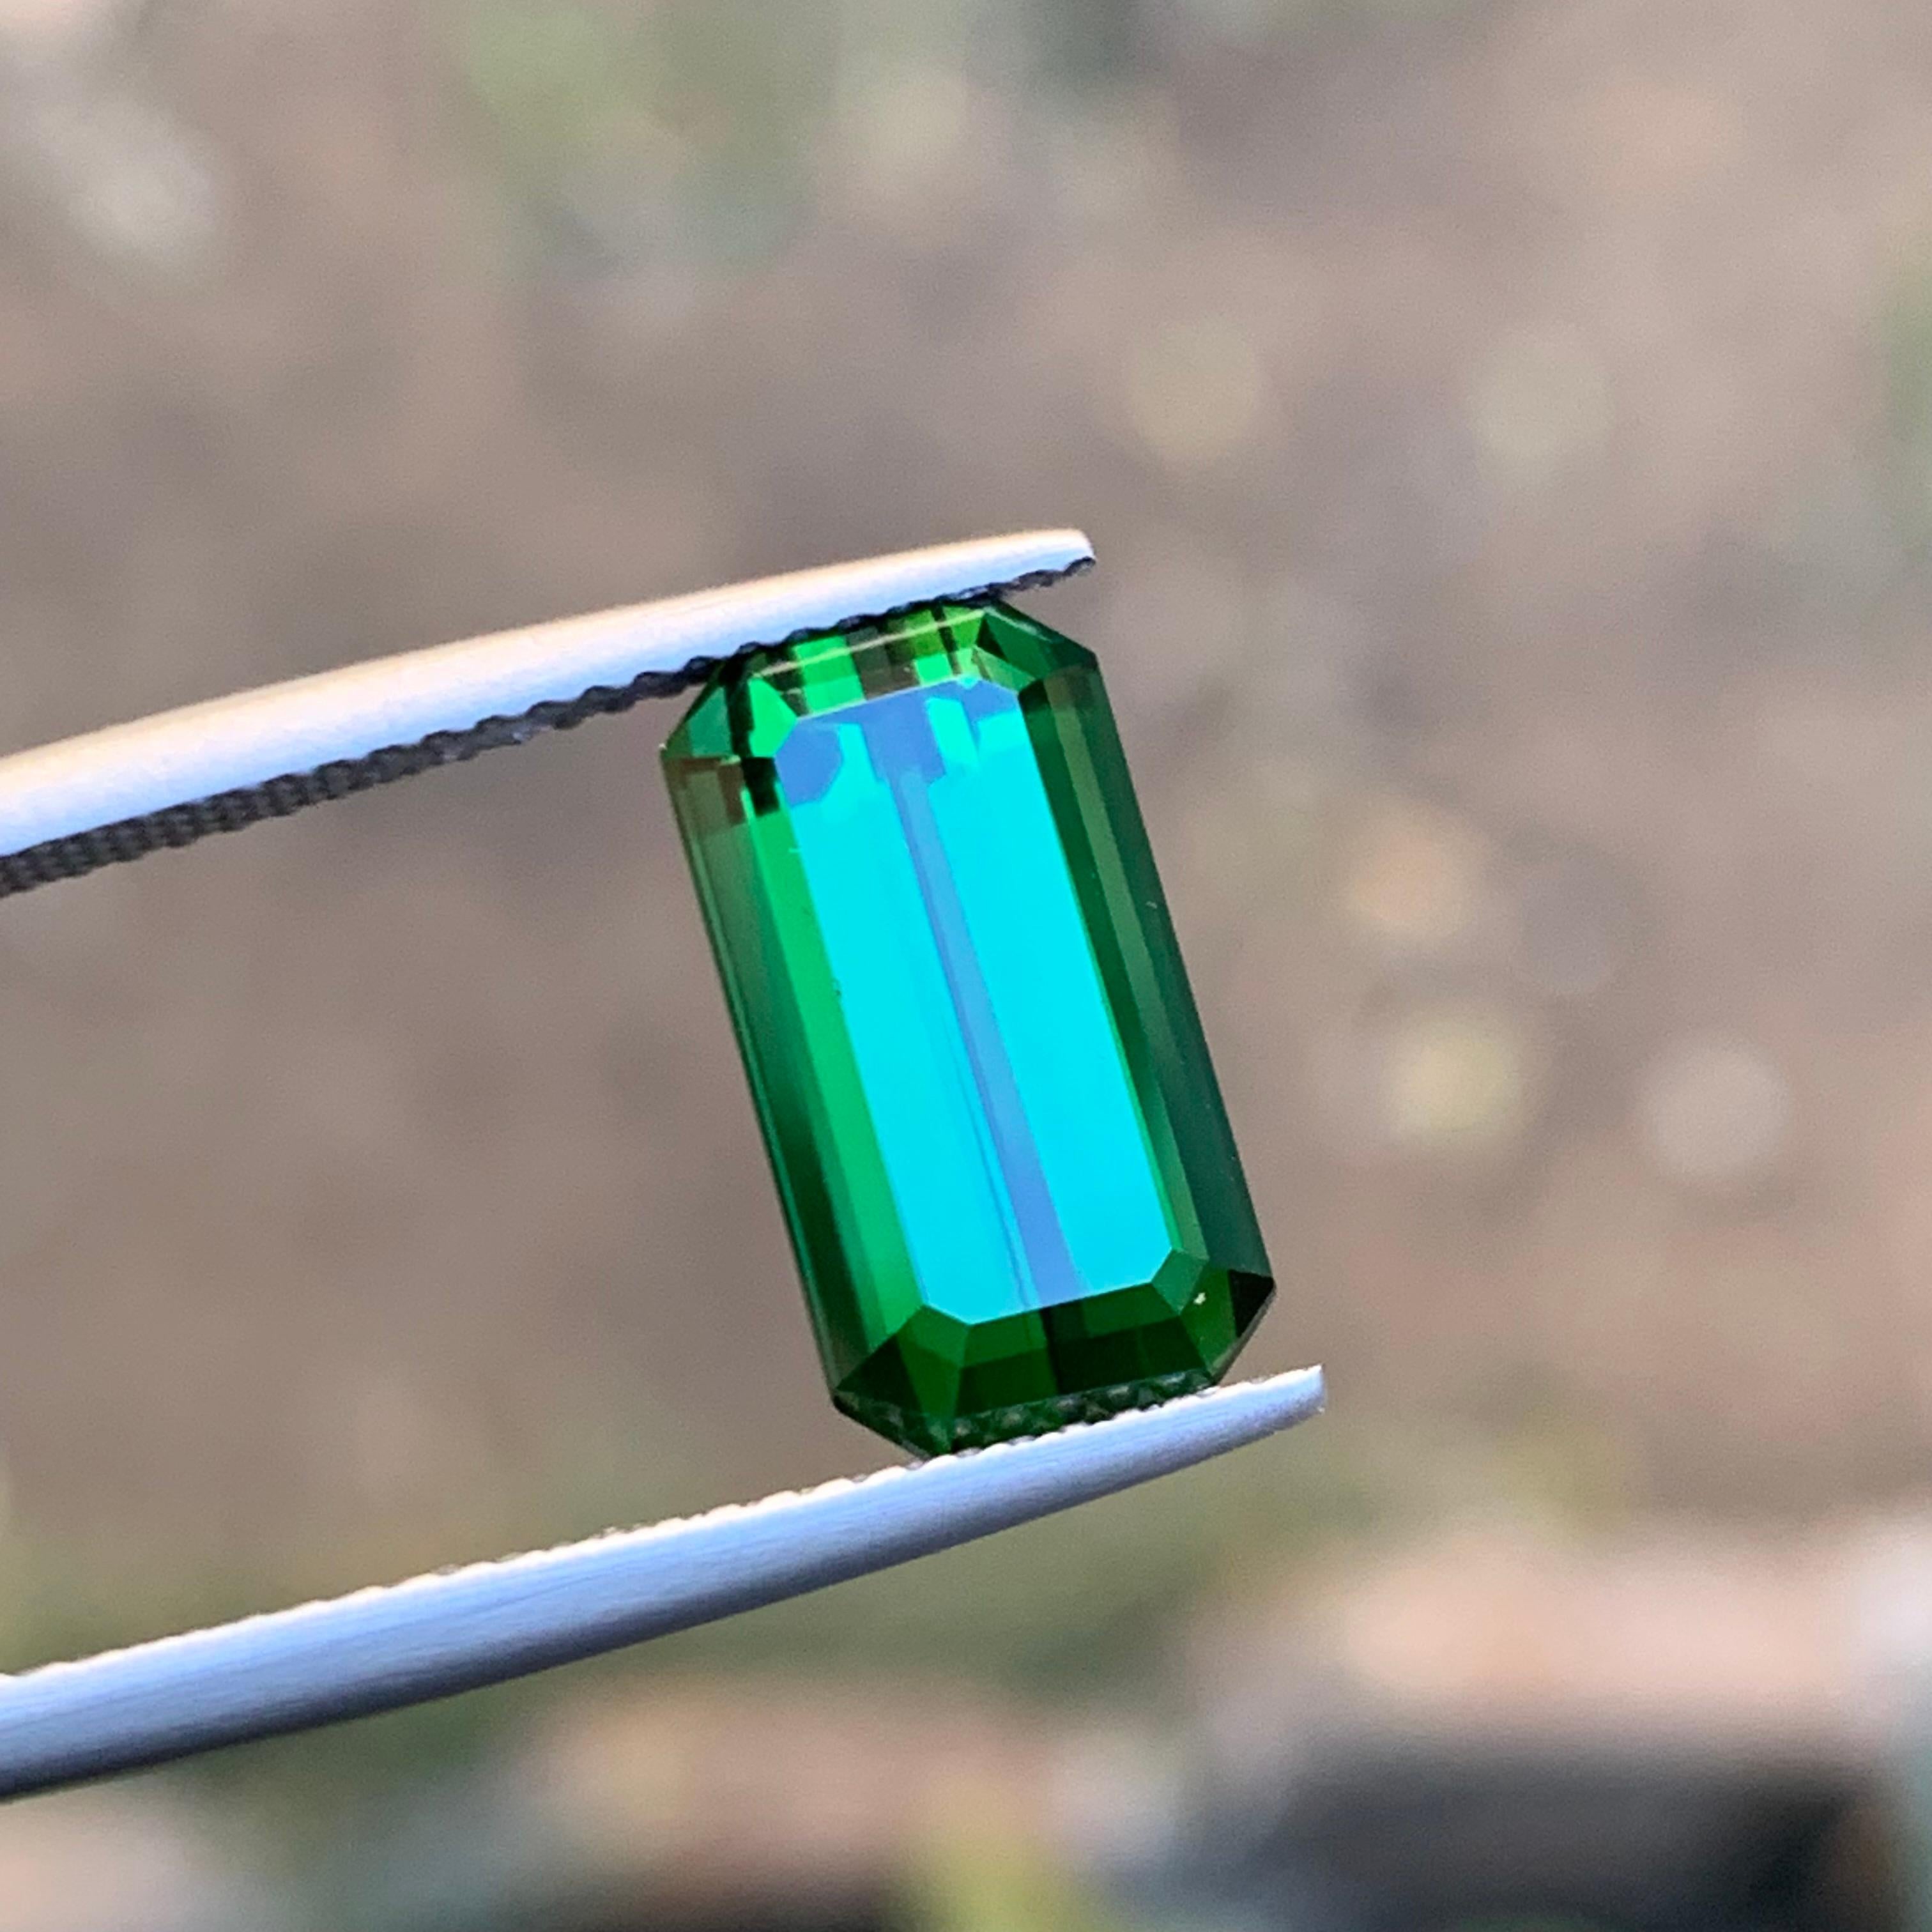 Elevate your jewelry collection with this exquisite deep green emerald-cut natural Tourmaline gemstone from Kunar, Afghanistan. Renowned for its excellent luster and eye-clean clarity, this gem is perfect for crafting timeless pieces for a precious